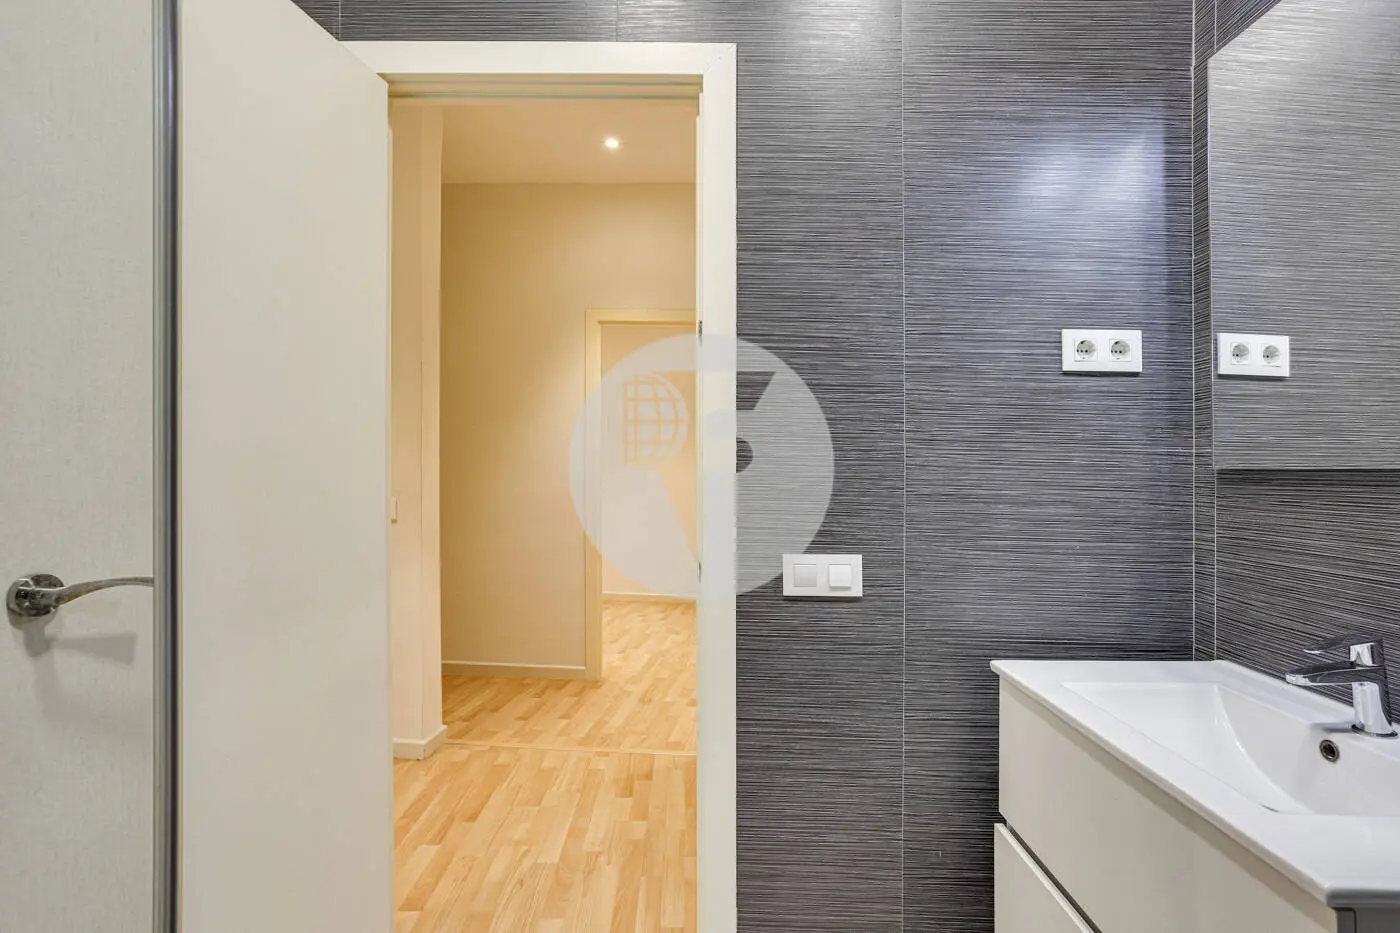 Magnificent apartment for sale next to Pl Universitat of 114m2 according to the land registry, located on Tallers Street in the Ciutat Vella neighborhood of Barcelona 28